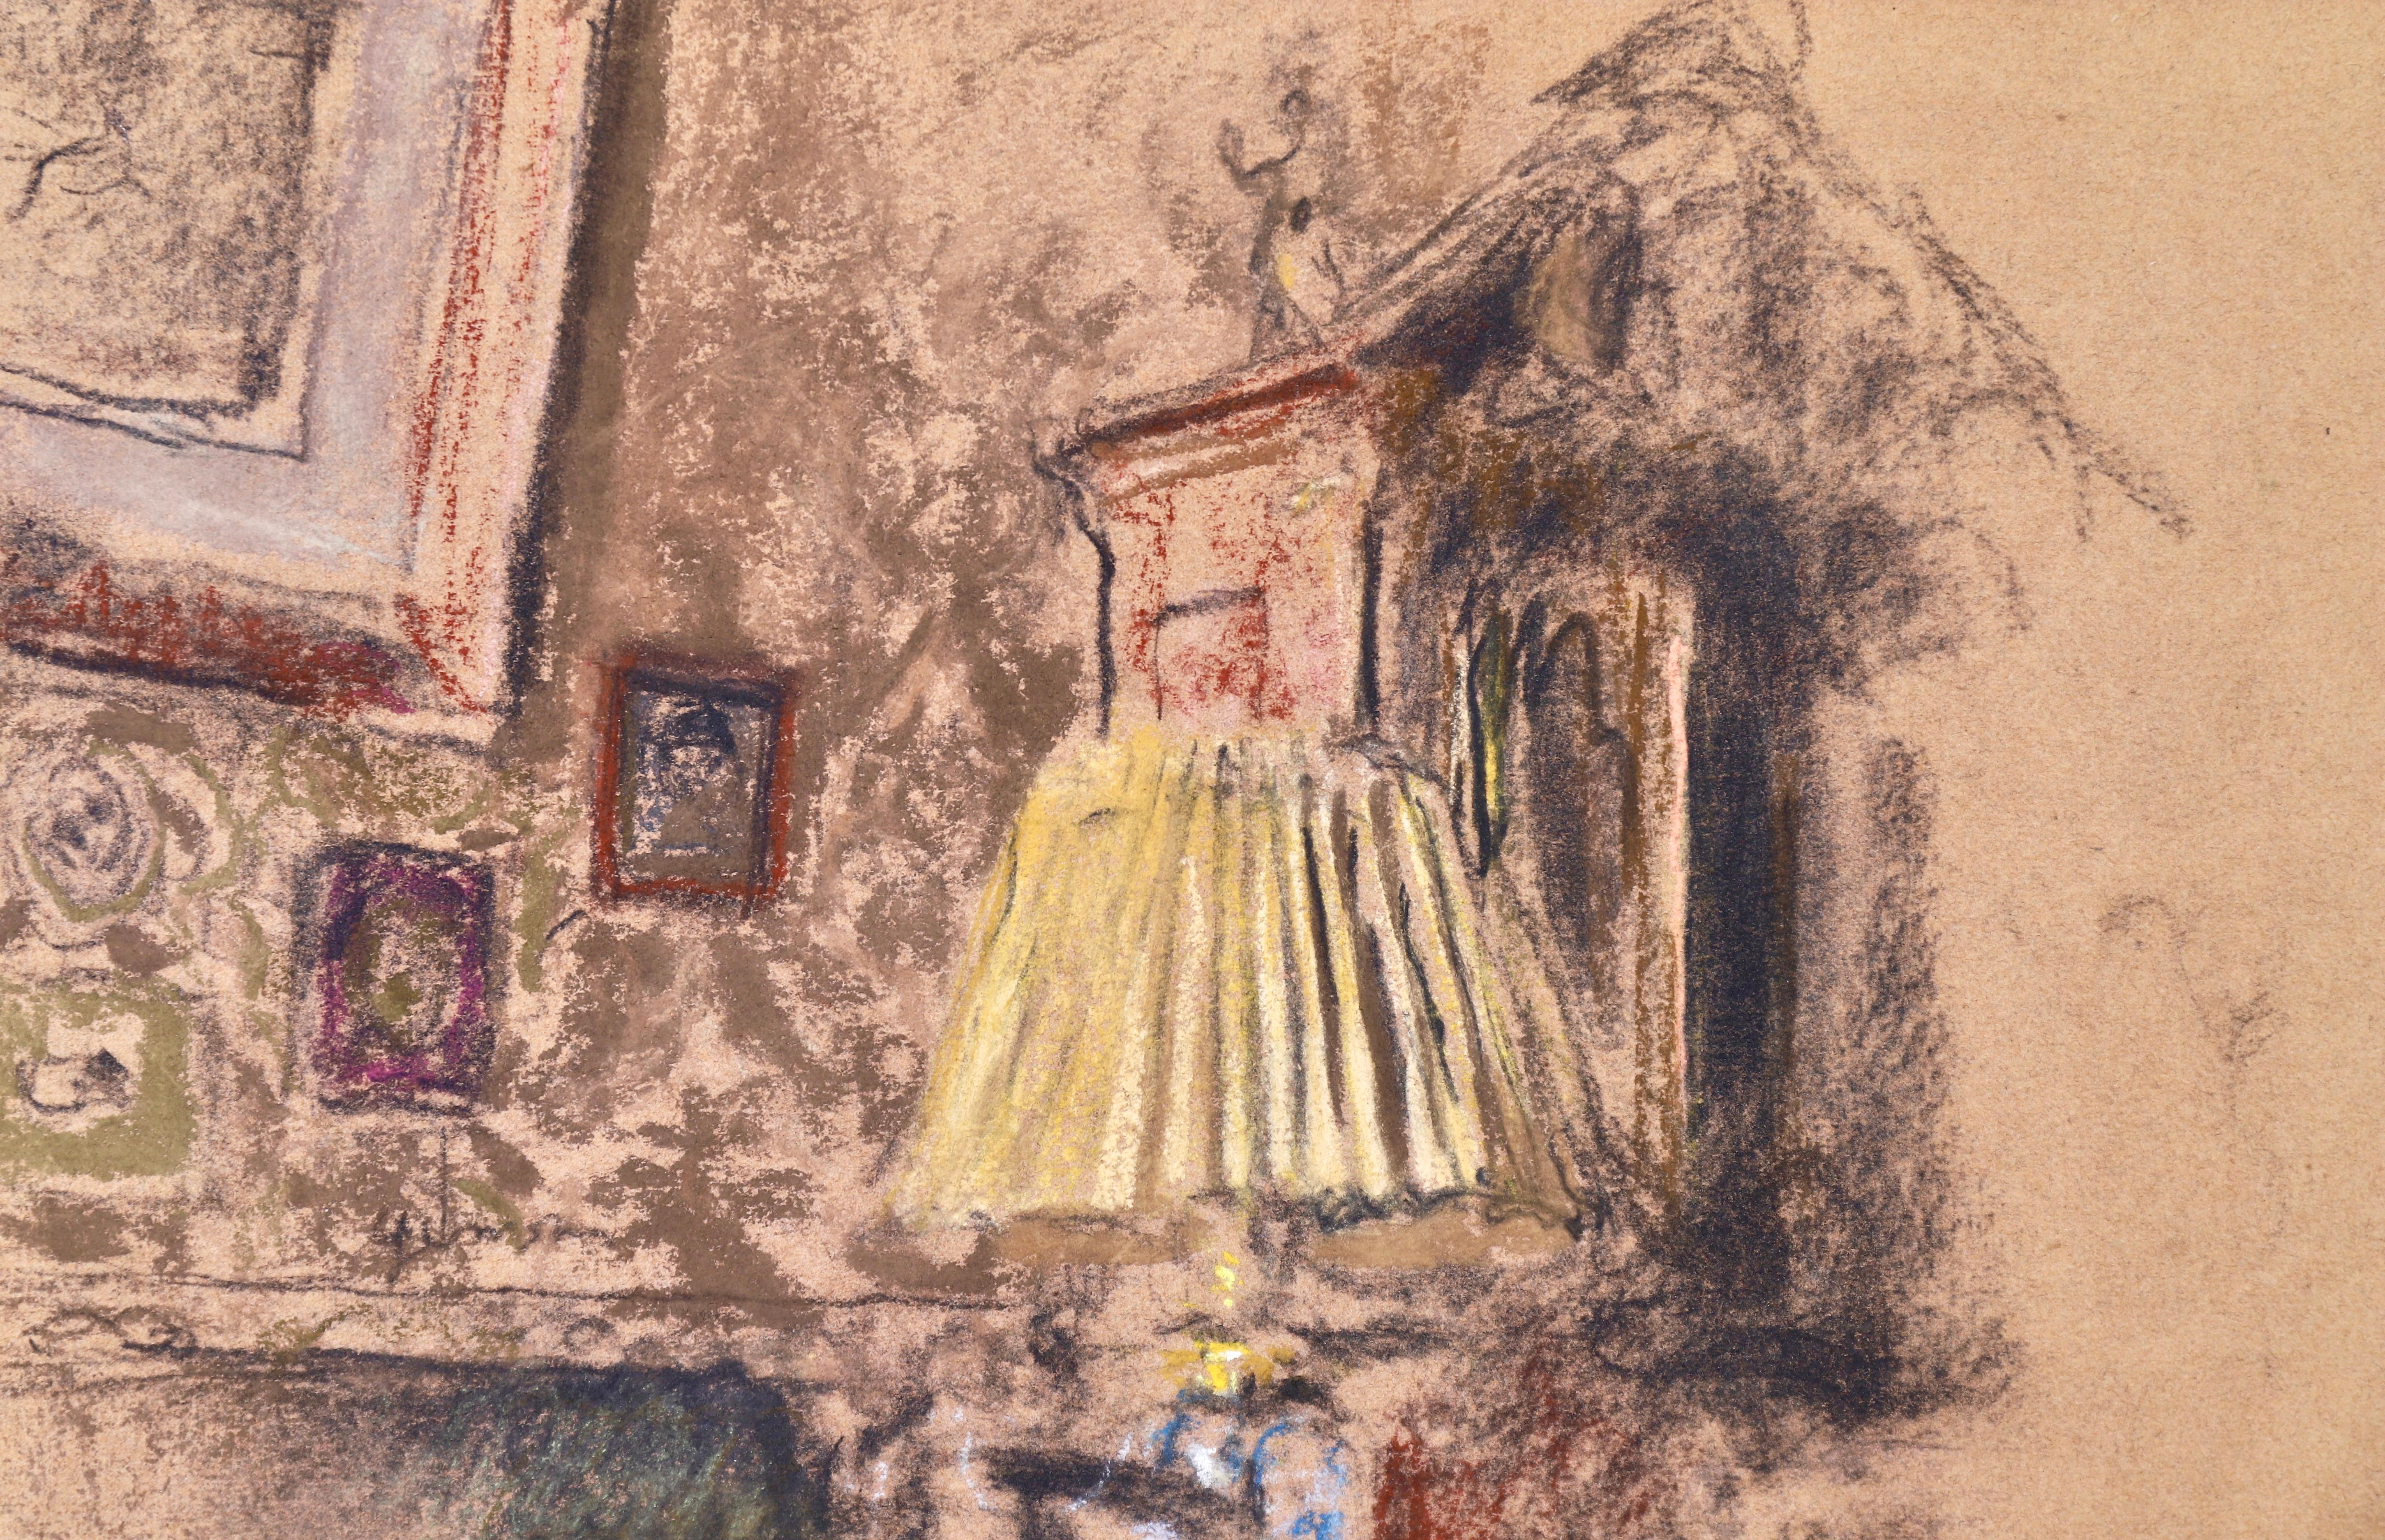 A wonderful pastel on board by French Nabis painter Edouard Vuillard depicting an interior scene with a yellow lamp amongst several other trinkets on a table and paintings and a cupboard on the wall behind. This piece is a study for the portrait of